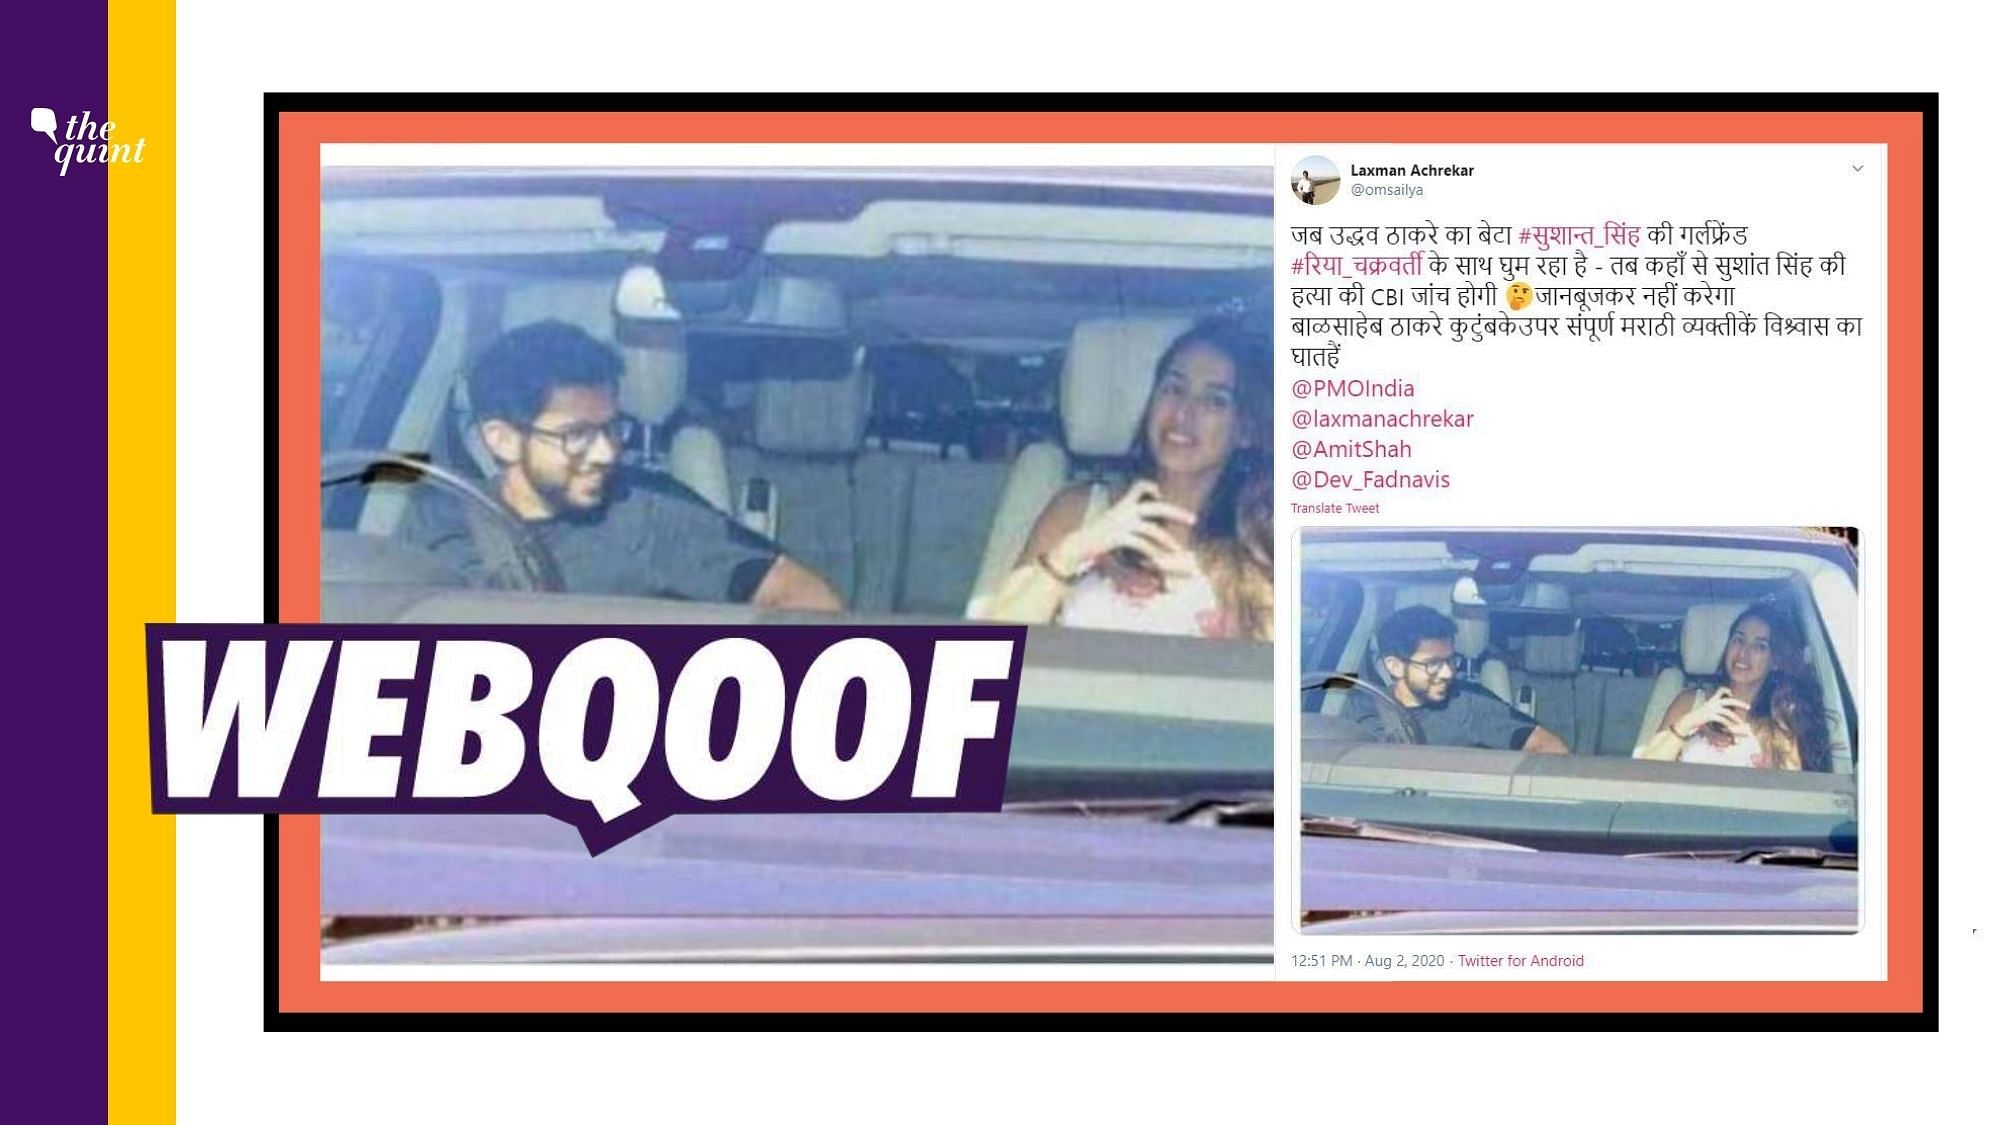 A photo of Bollywood actor Disha Patani with Aaditya Thackeray is being shared with a claim that it shows actor <a href="https://www.thequint.com/entertainment/celebrities/i-believe-ill-get-justice-rhea-chakraborty-issues-statement">Rhea Chakraborty</a> with the politician.